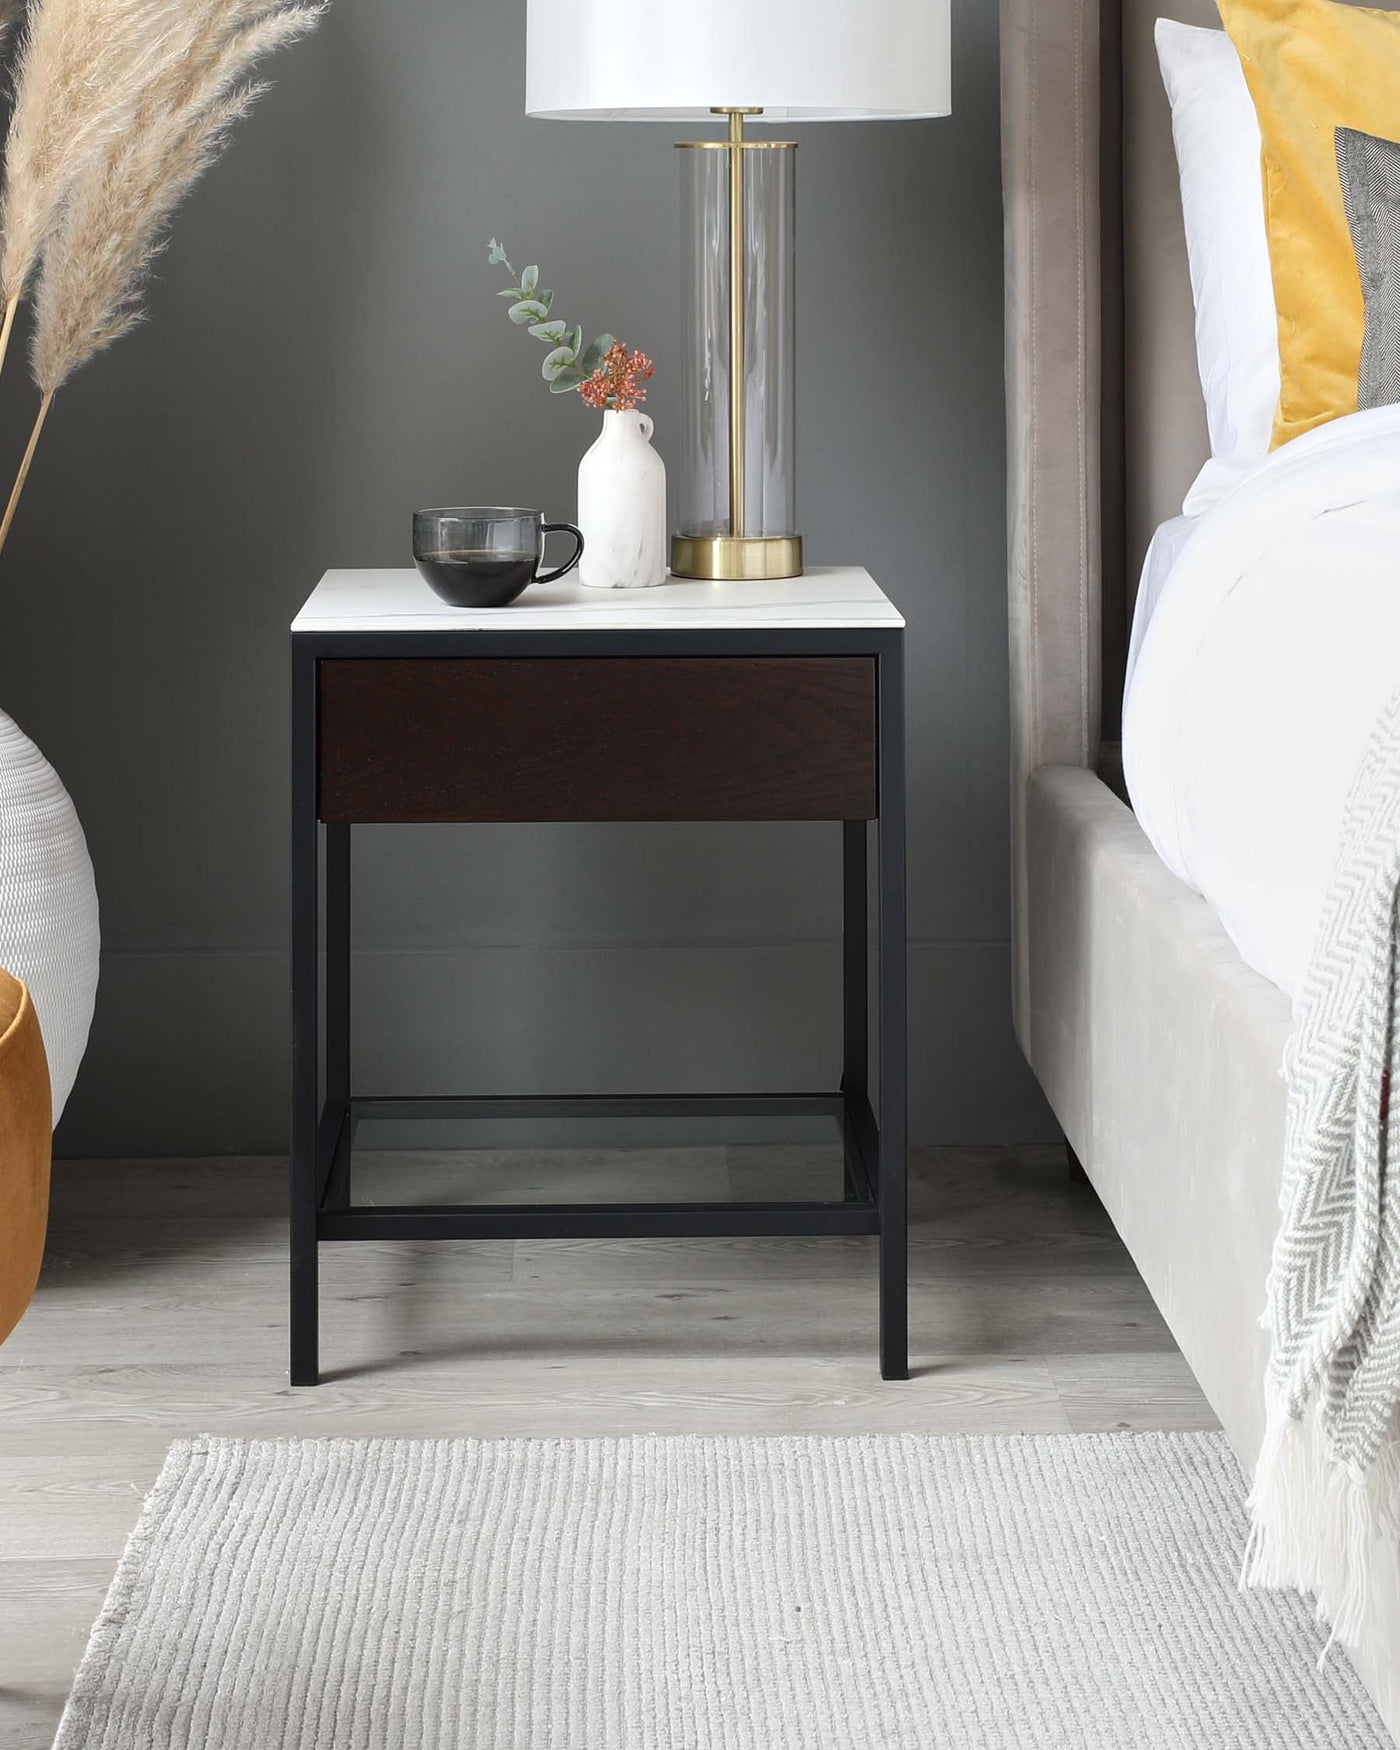 Modern minimalist bedside table with a sleek design featuring a white tabletop and a dark wooden drawer on a black metal frame, complemented by an open lower shelf providing additional storage space. Perfect for contemporary bedroom decor.